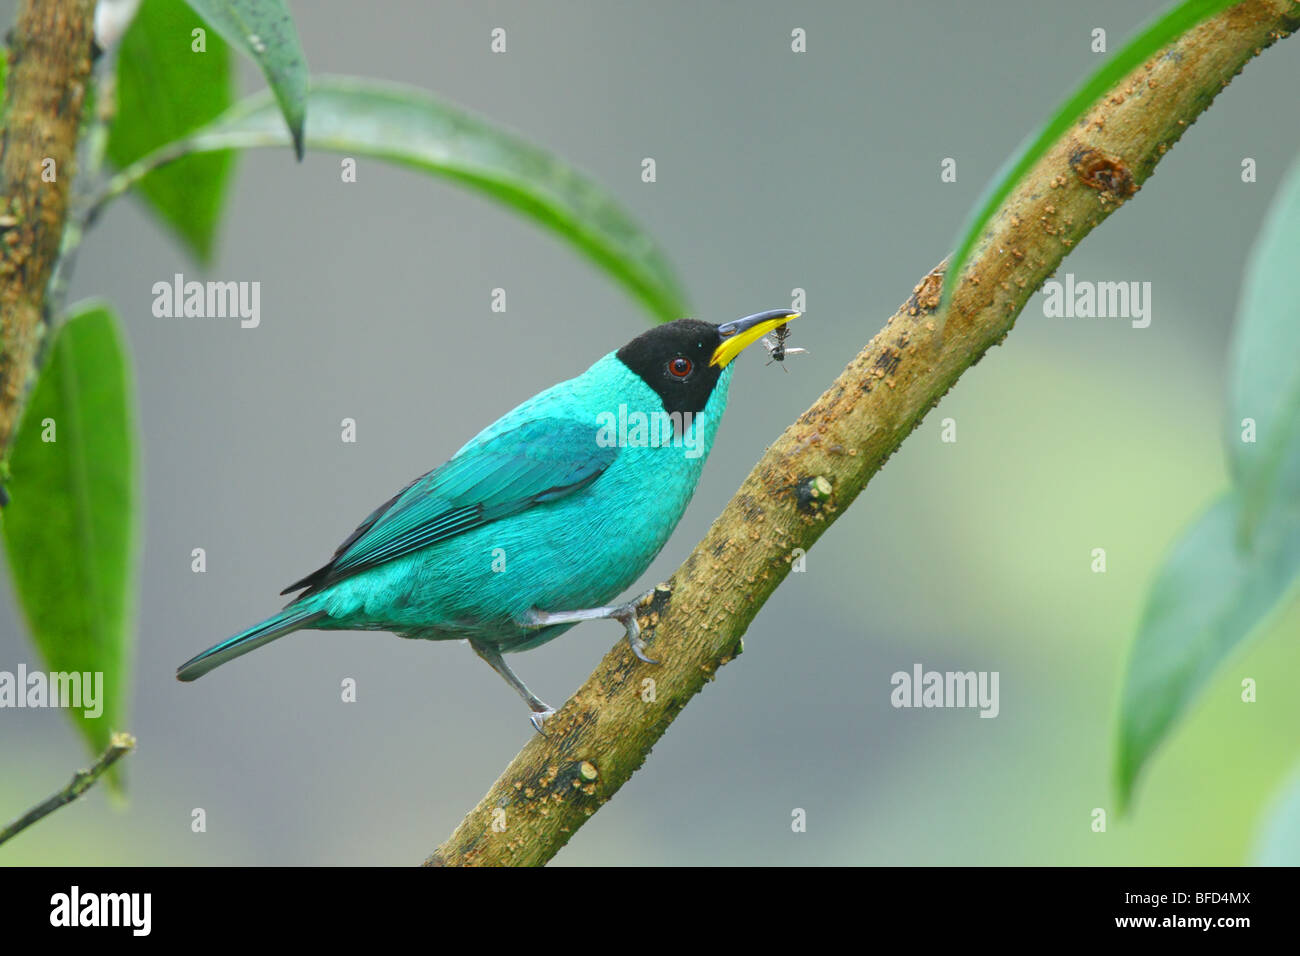 Green Honeycreeper with wasp prey item. Stock Photo